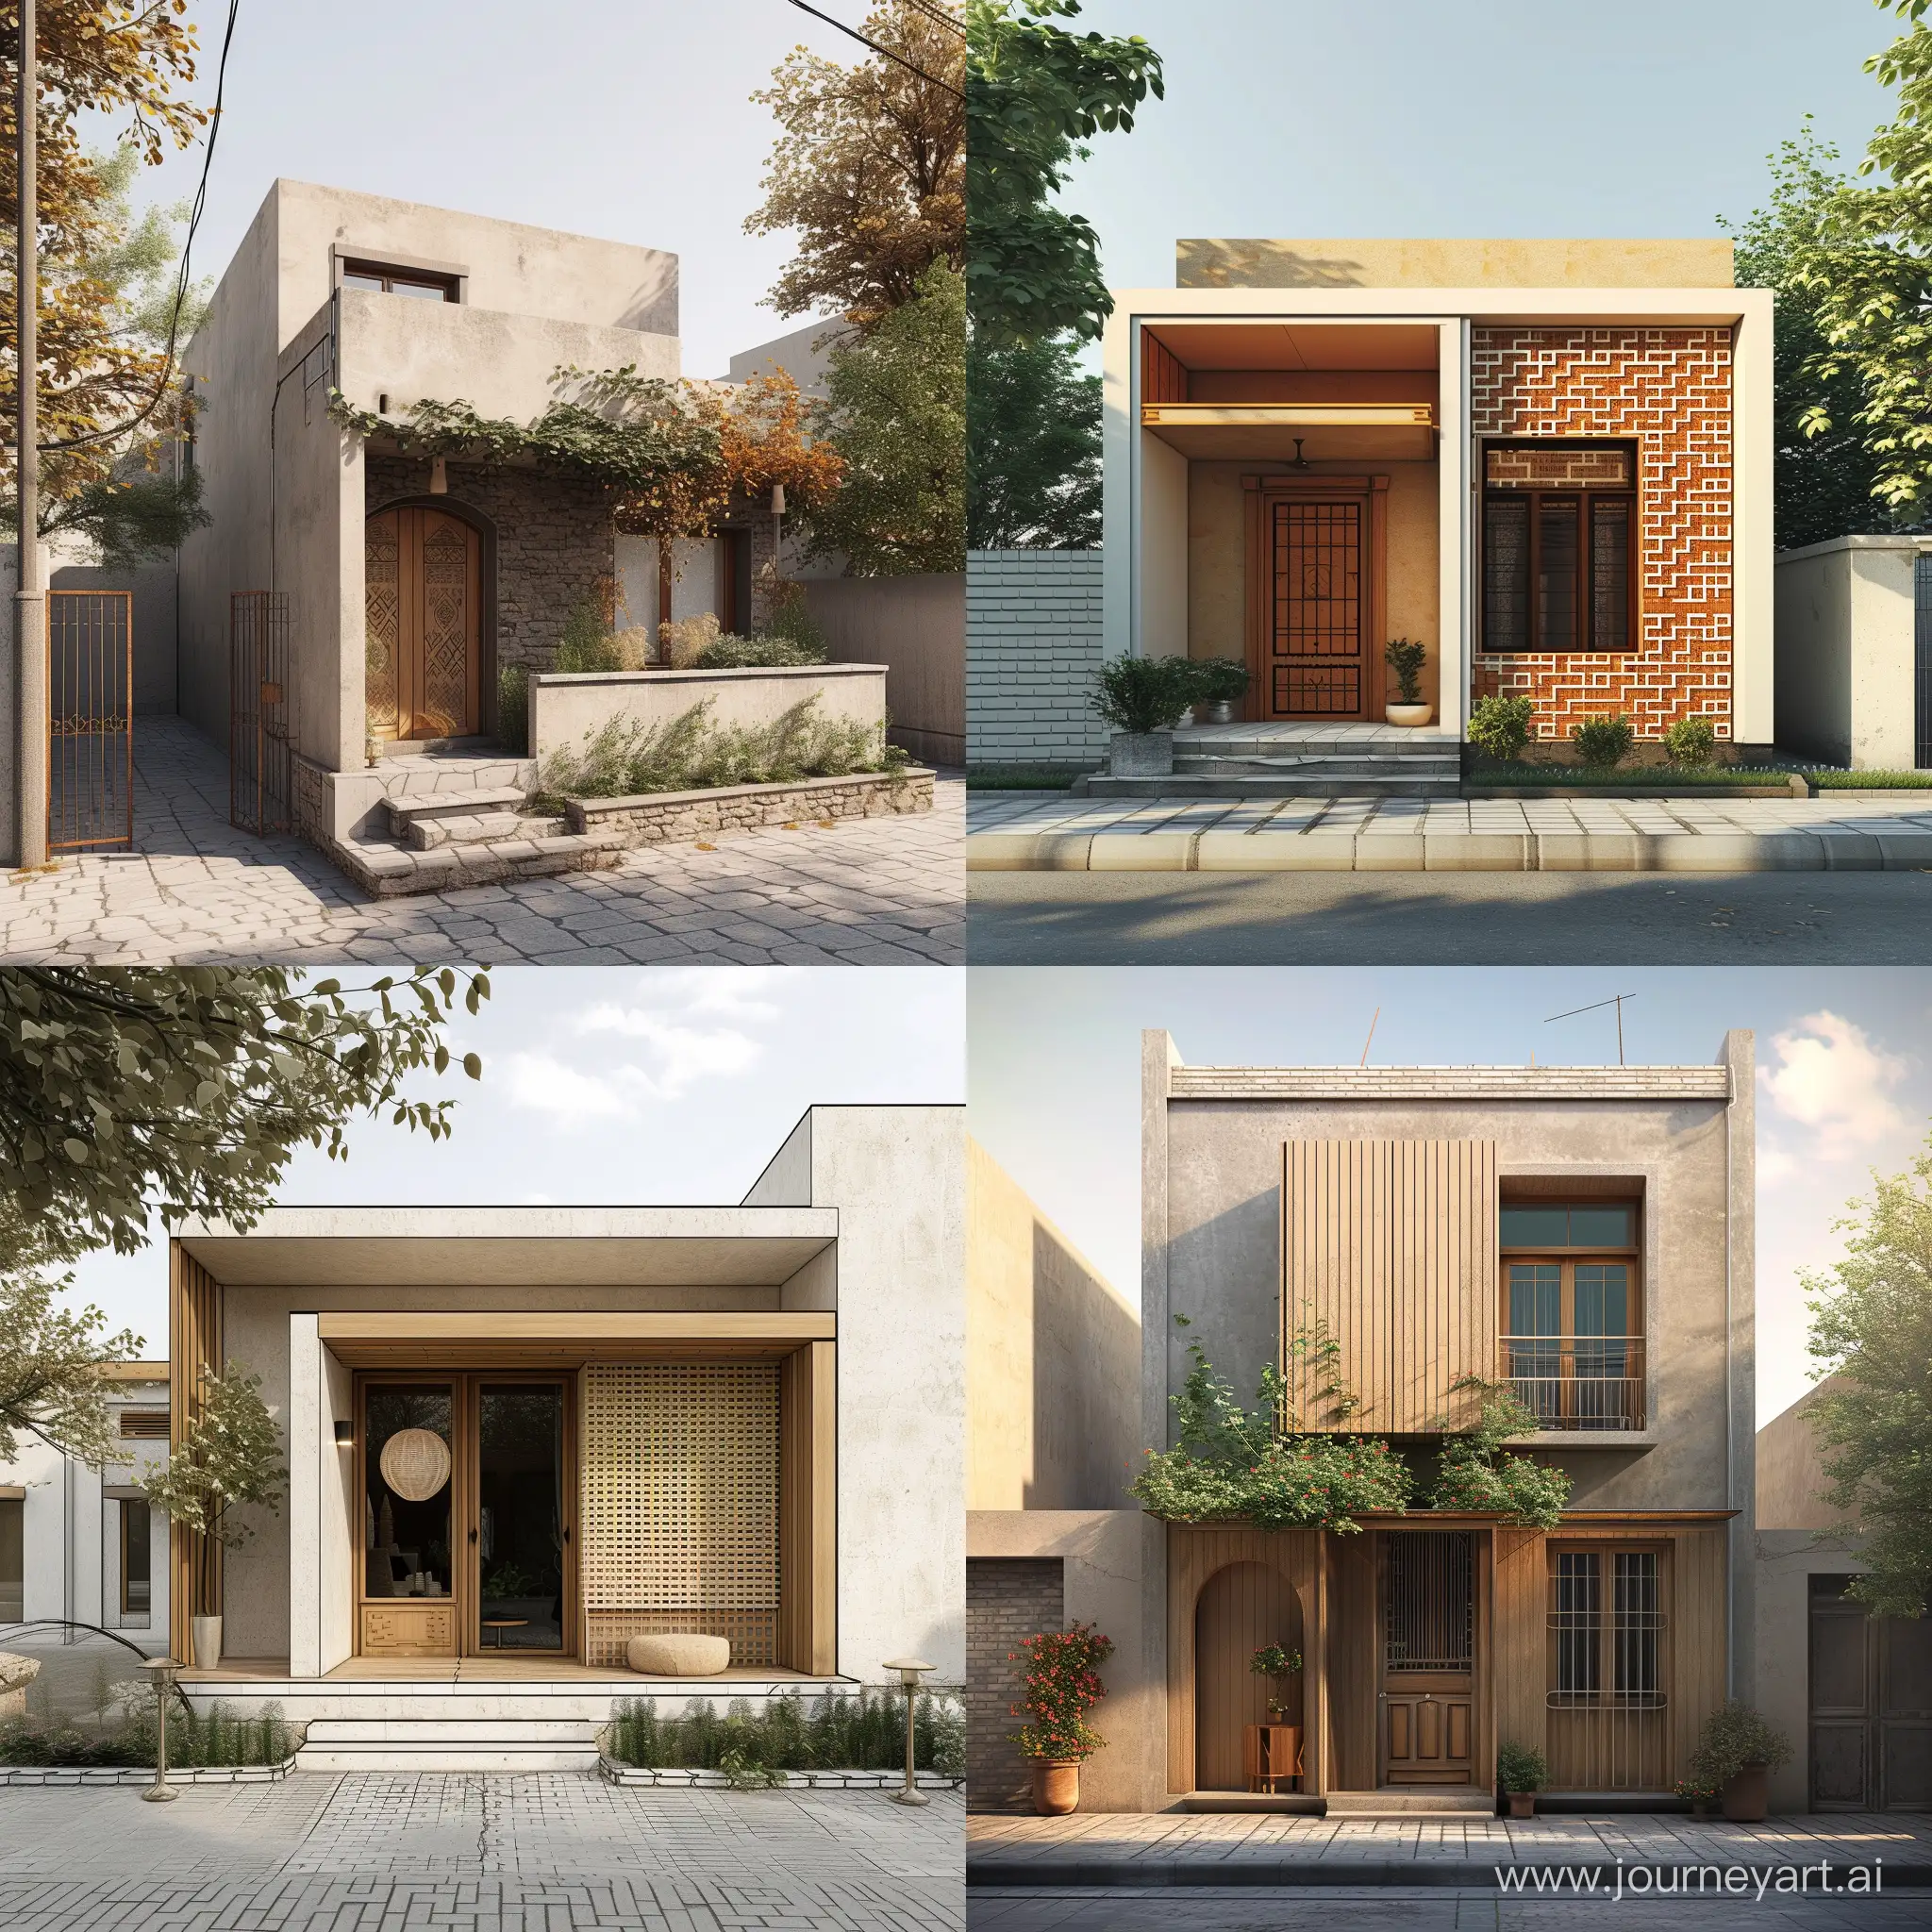 Designing a small house in the urban space of Zahedan in the style of post-colonial architecture. A small house with a focus on post-colonial elements and details of the entrance of the house. The urban space is known to some extent. The final output should be in the form of realistic photos.